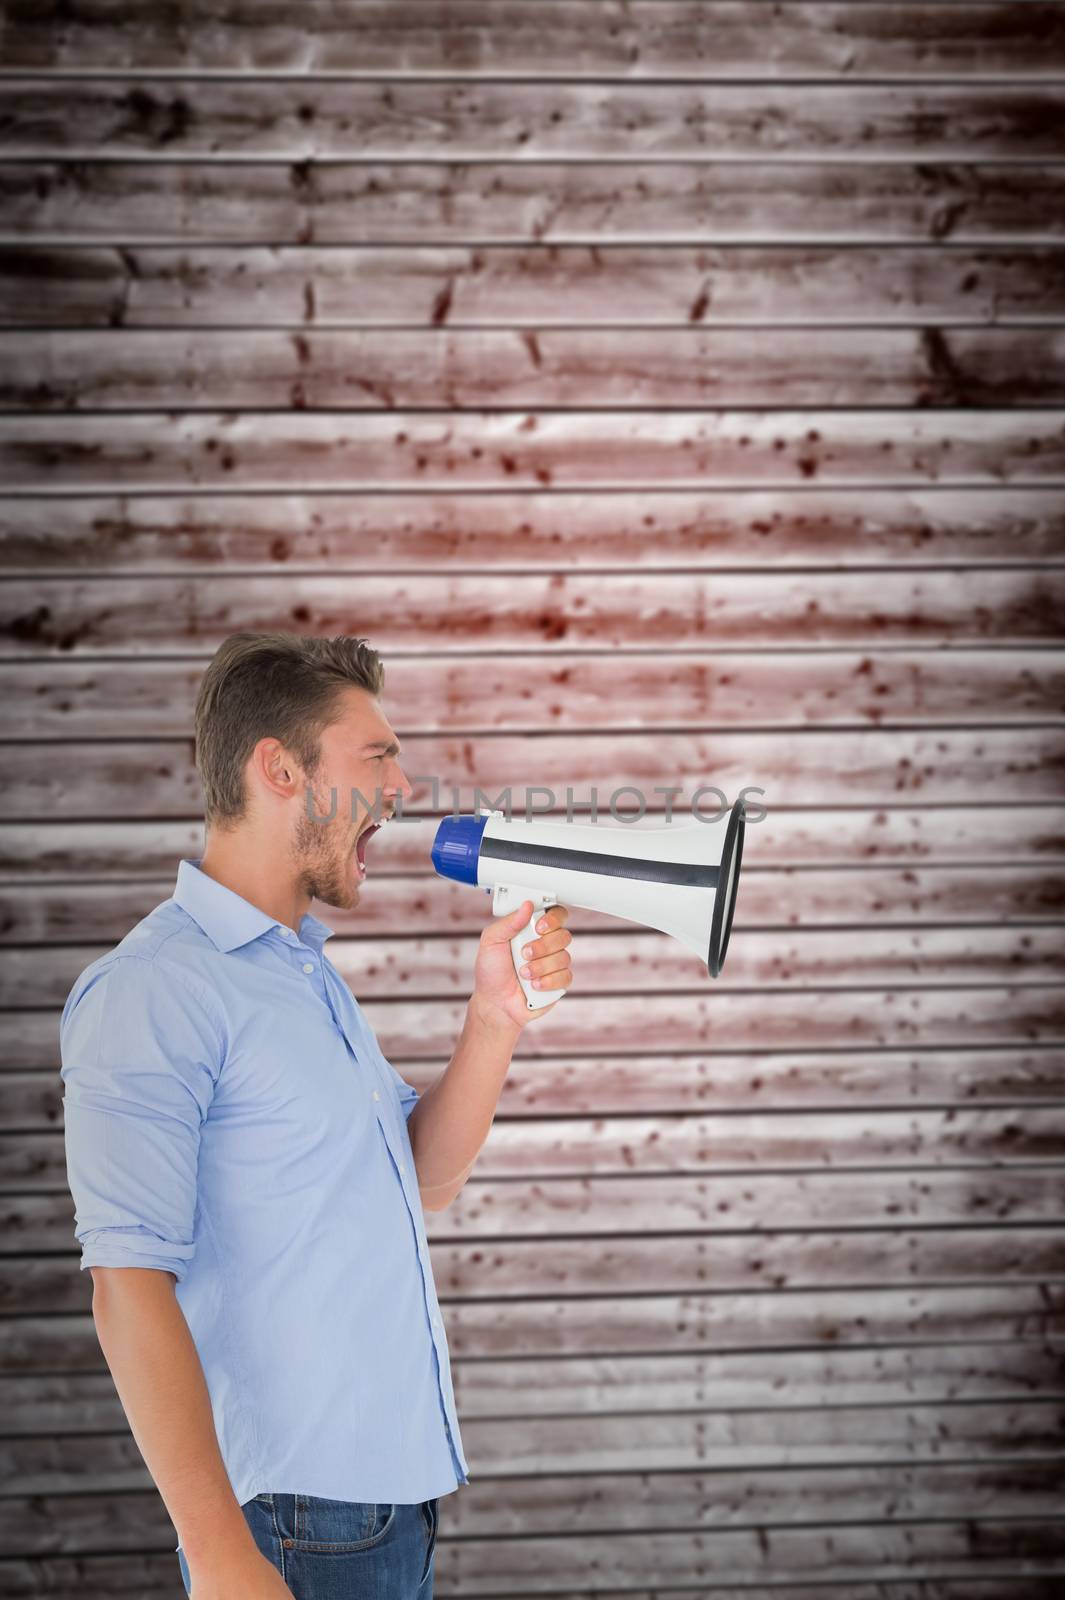 Angry man shouting through megaphone against wooden planks